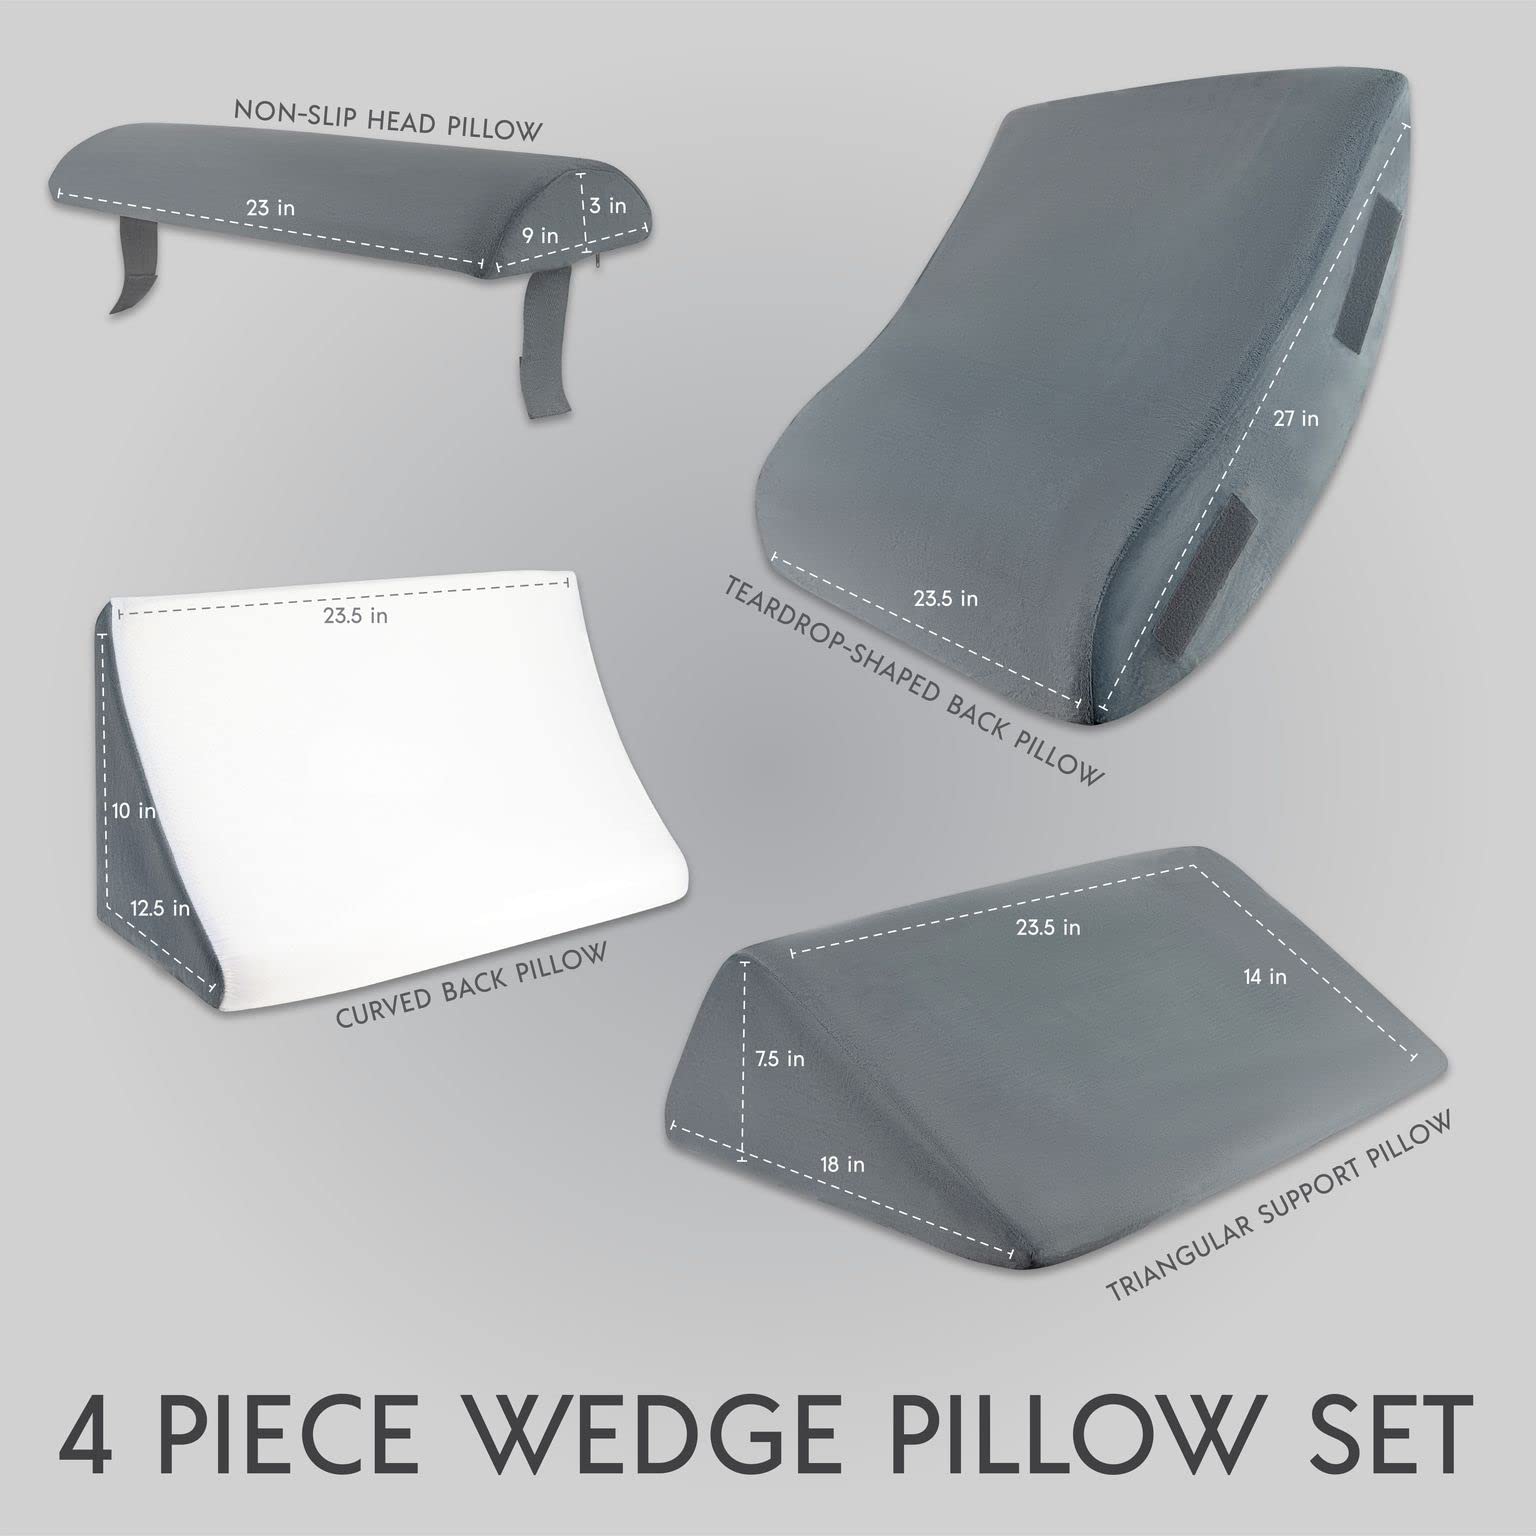 4 Pcs Orthopedic Bed Wedge Pillow Set – Post Surgery, Relaxing, Back & Adjustable Head Support Cushion – Triangle Memory Foam Pillow for Acid Reflux, Sleeping, Reading, Leg Elevation, Snoring (GREY)